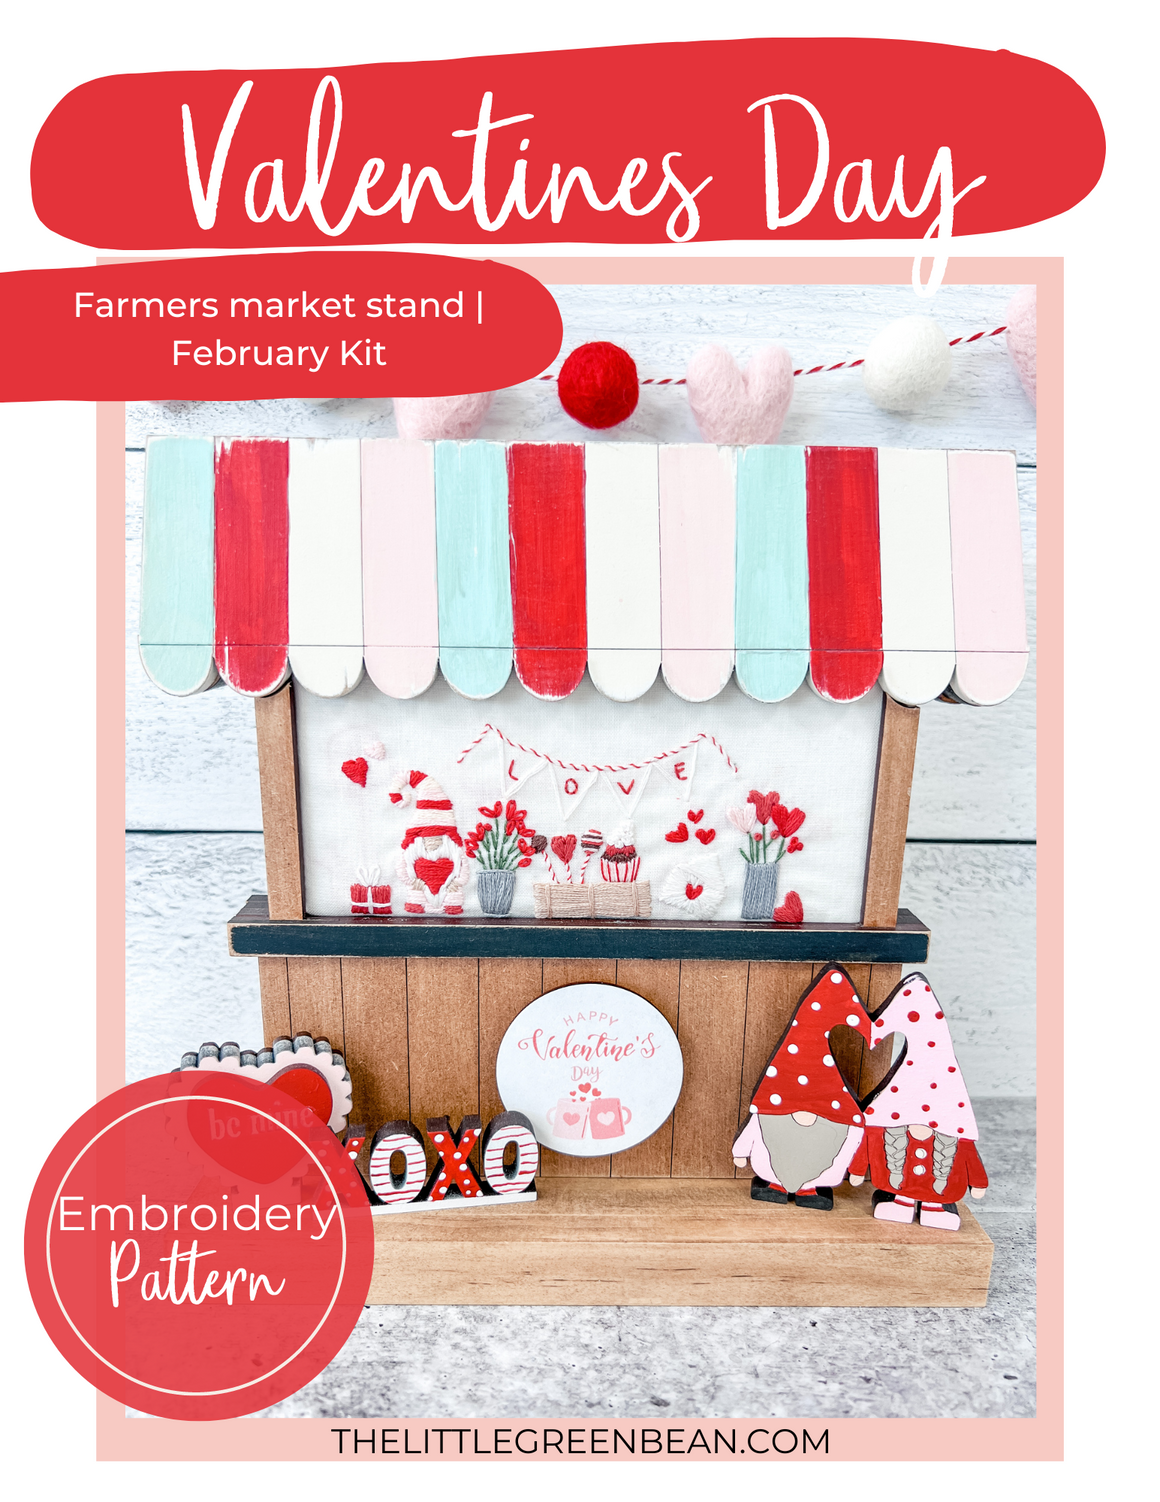 Farmers market Stand | Valentines Day | Embroidery Pattern Digital Download